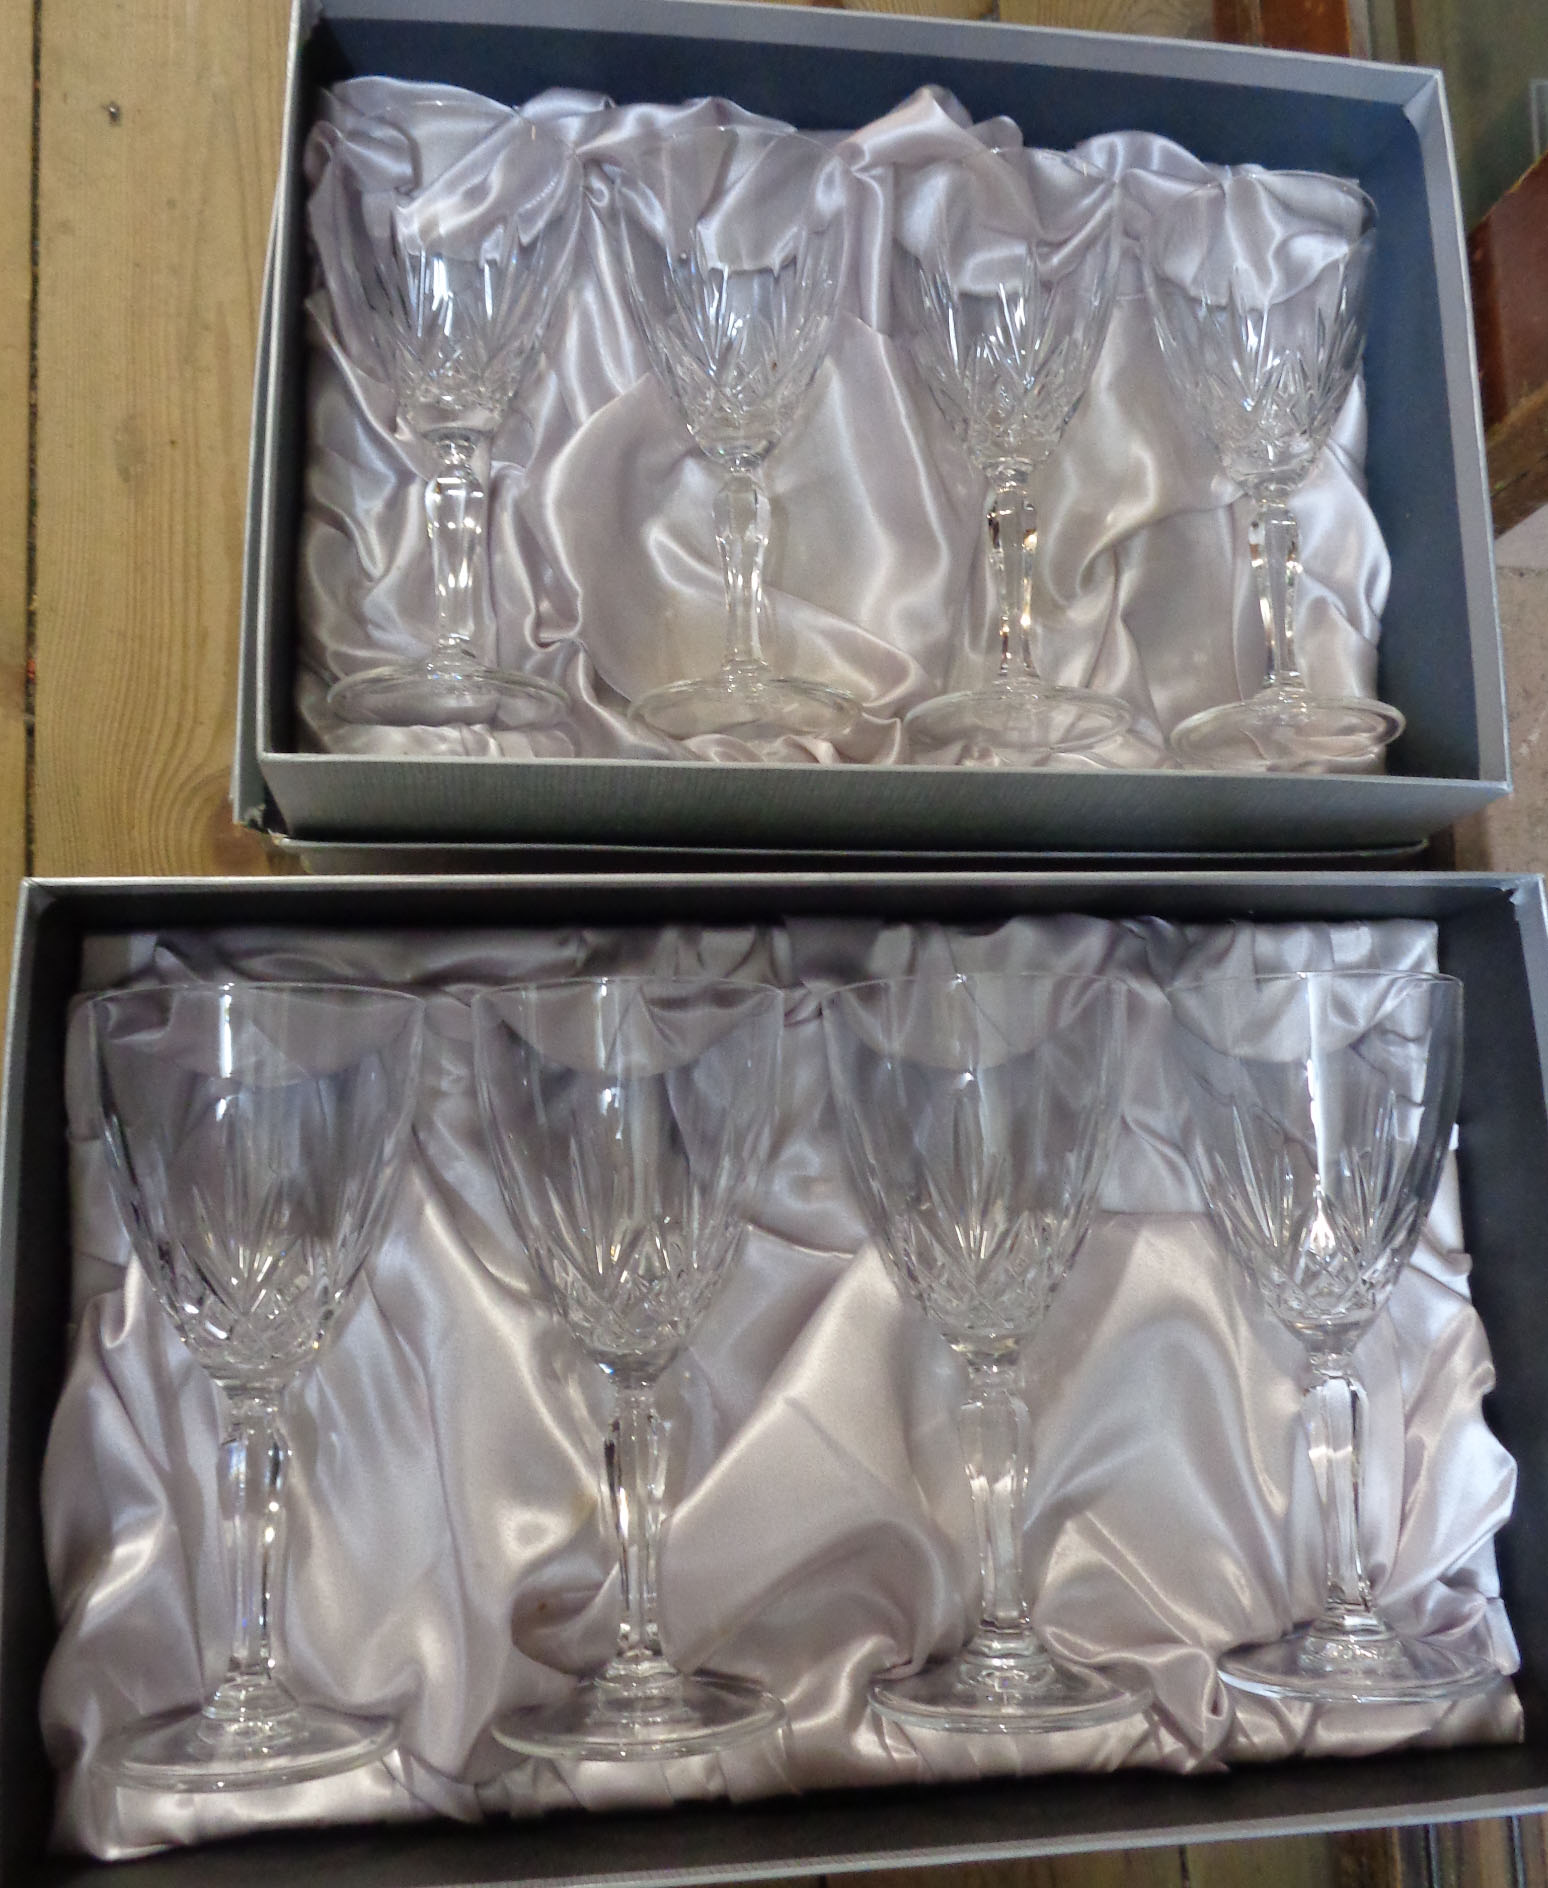 Six boxed four glass sets of Buckingham lead crystal wine glasses from the Debenham Gifts